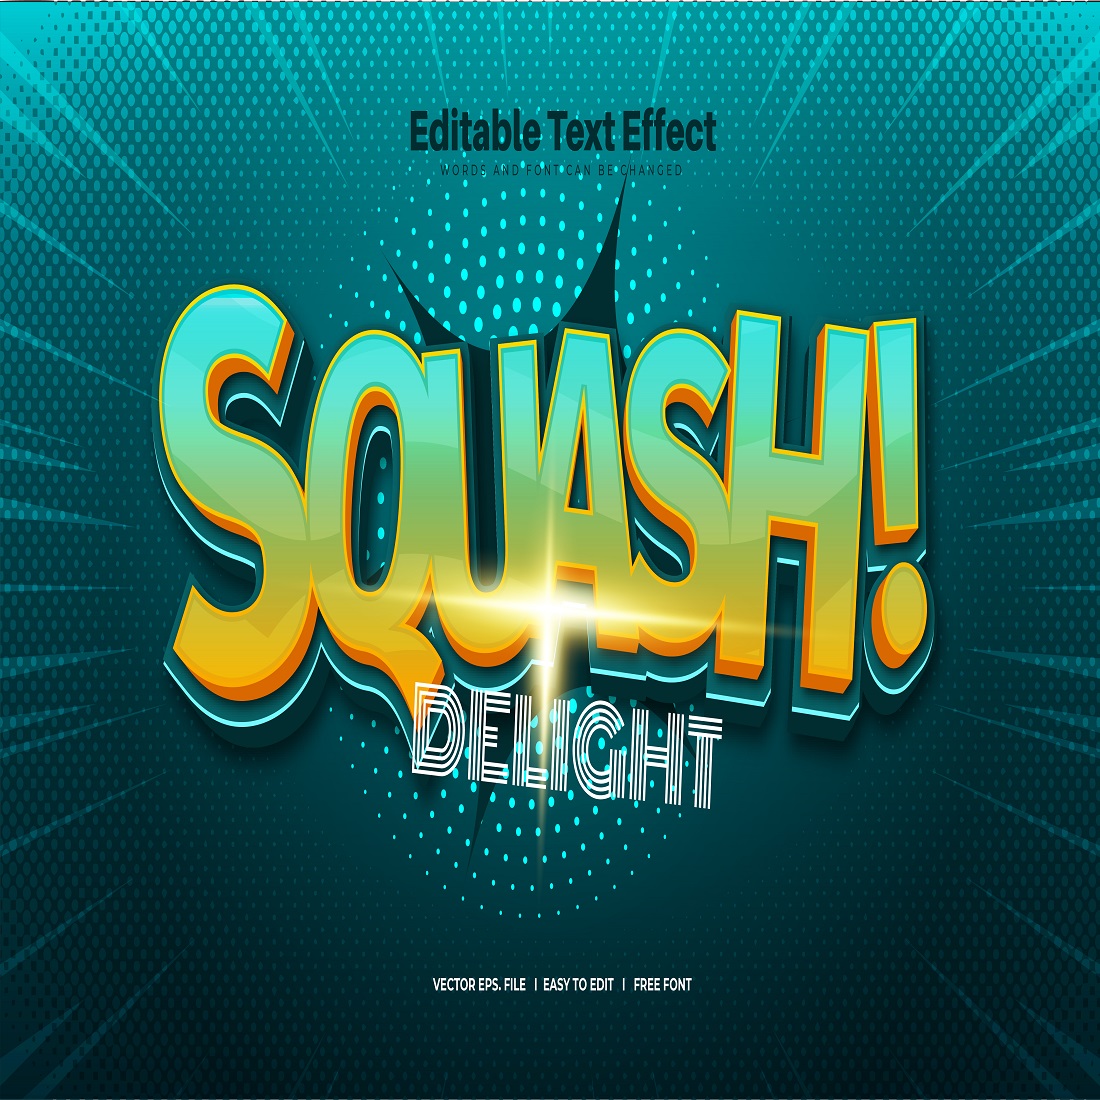 Squash delight text effect preview image.